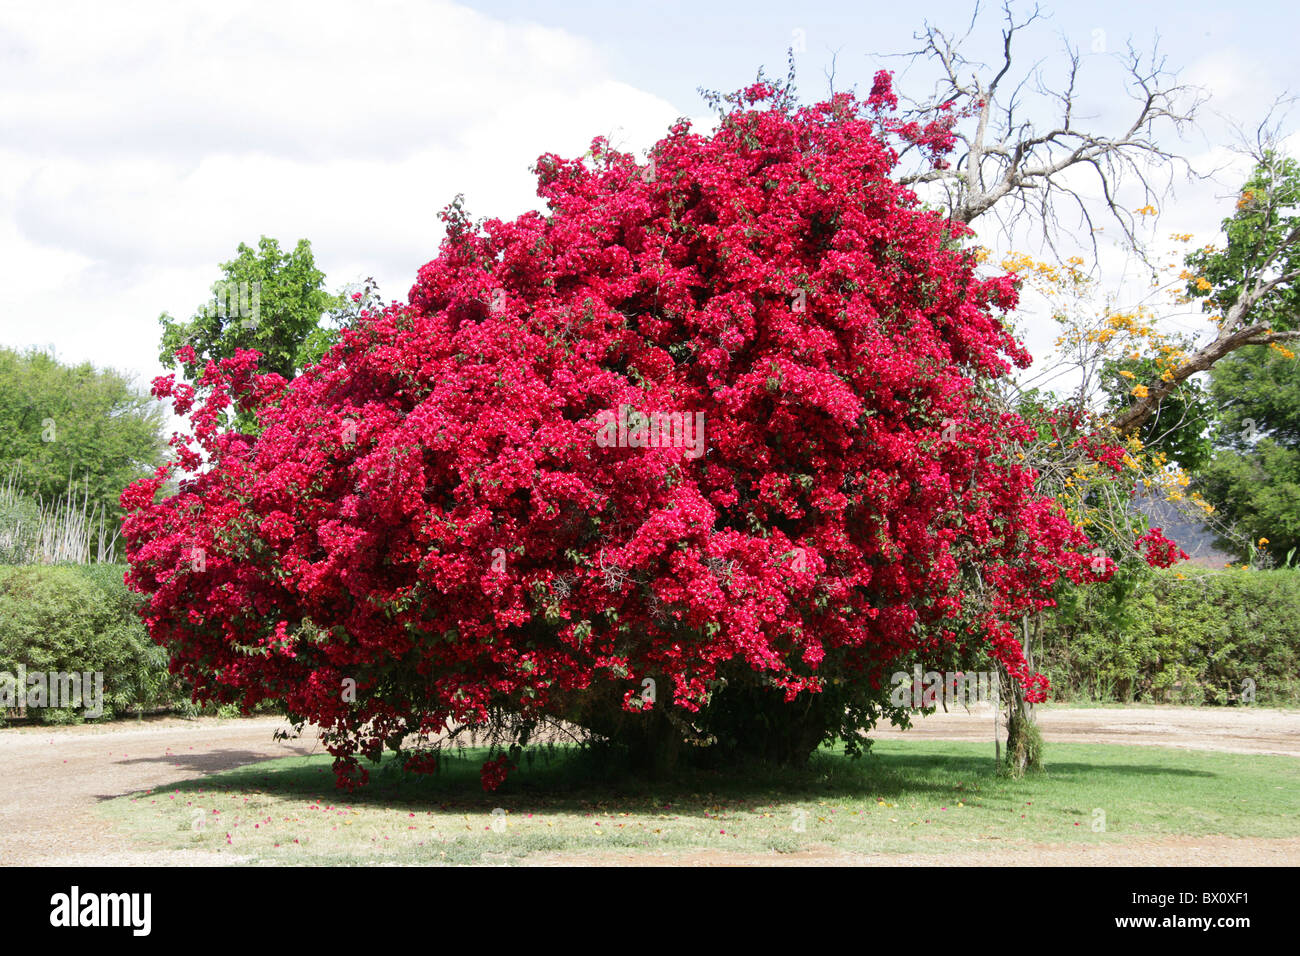 Bougainvillea sp., Nyctaginaceae. Native to Brazil, Peru and Argentina, South America. Stock Photo